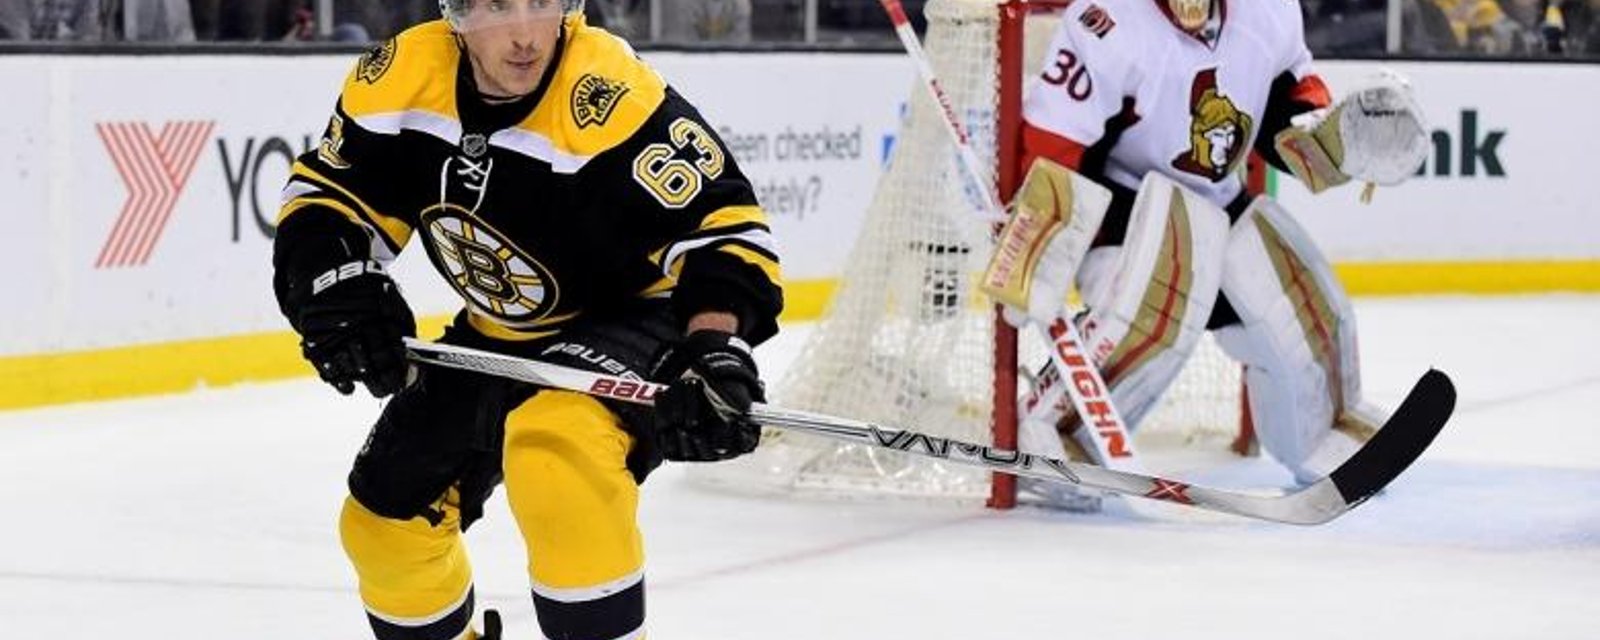 Rumor: Reports of offers on both sides of Bruins/Marchand negotiations.